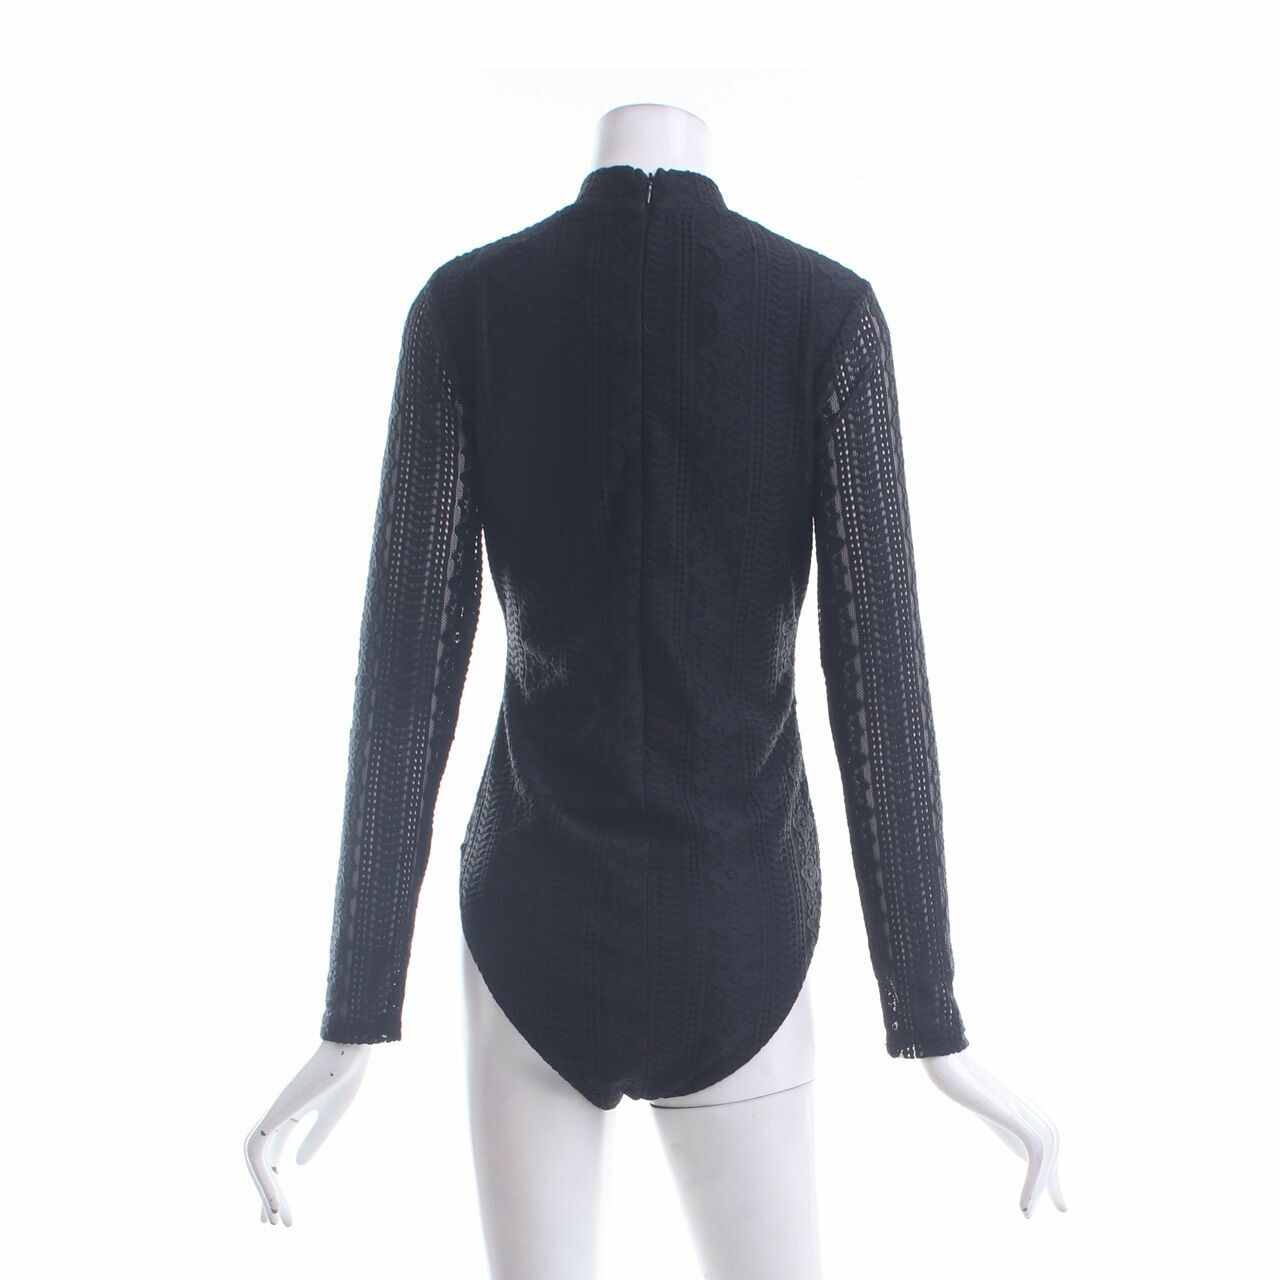 Valley Girl Black Lace One Piece Blouse